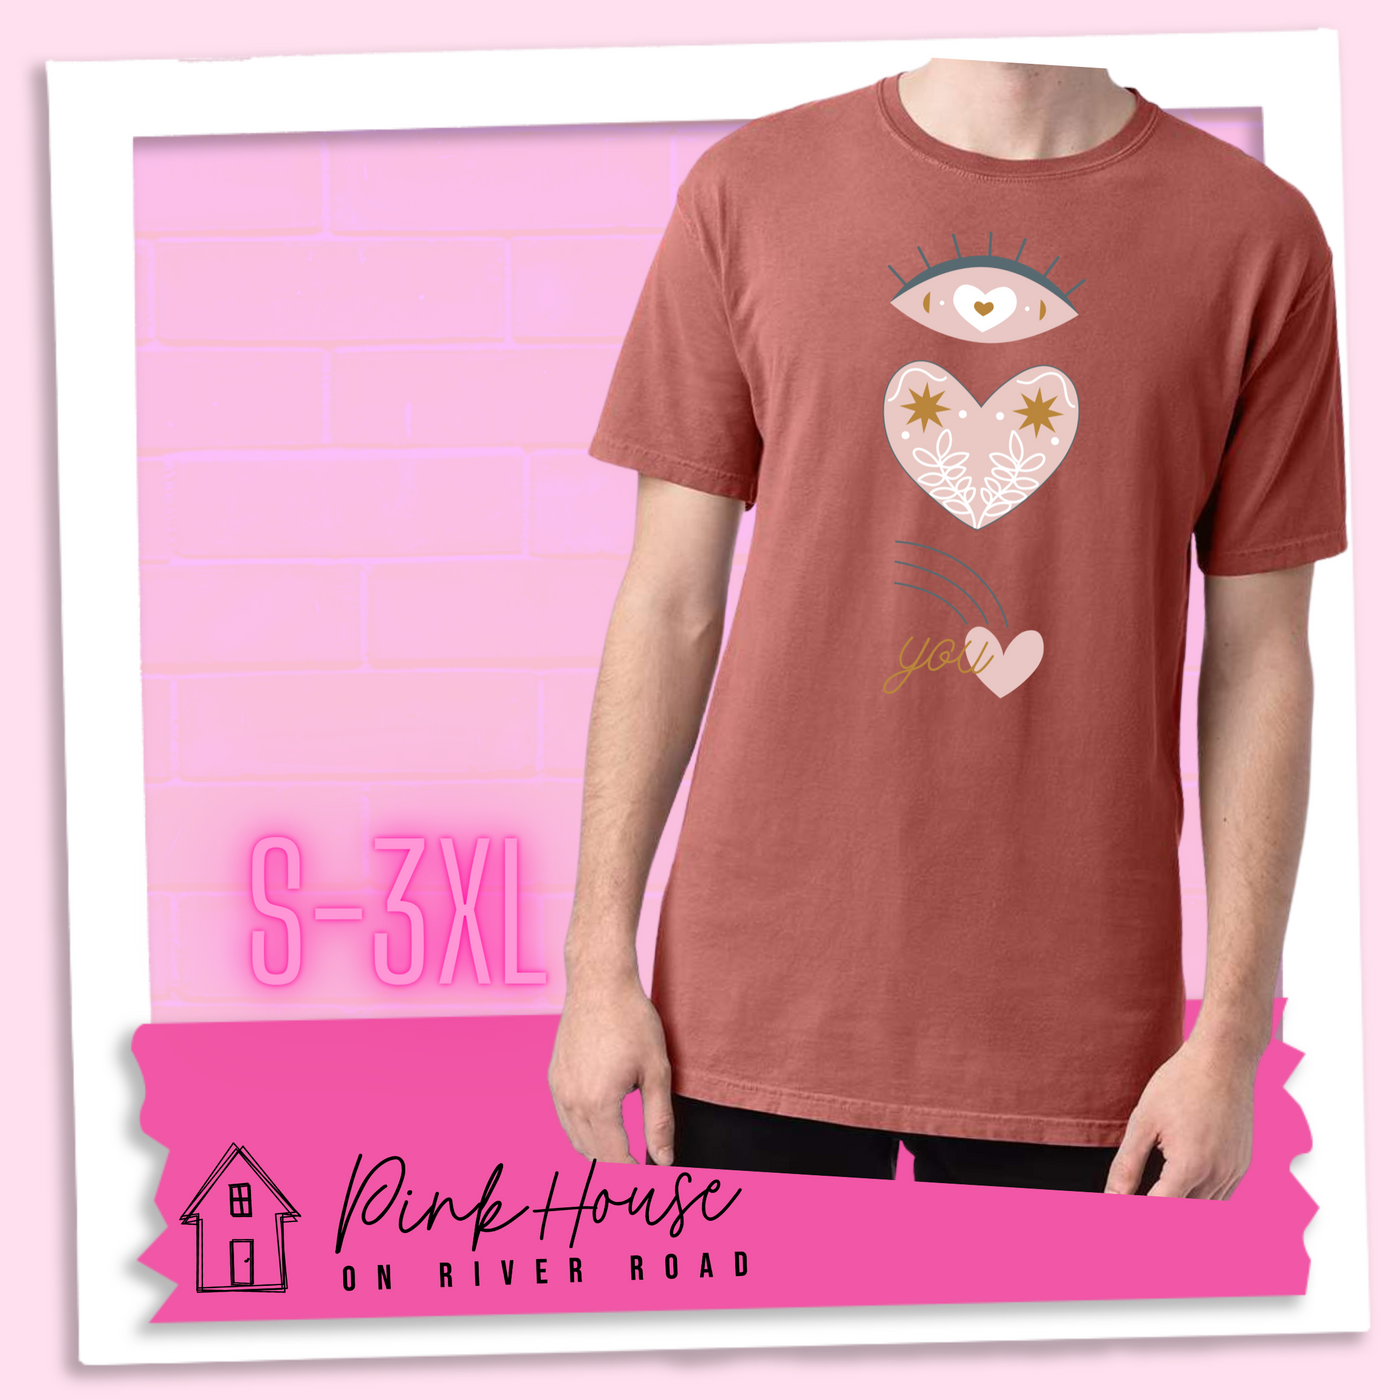 Nantucket Red tee with a graphic of an eye with a heart for the pupil and underneath that a heart with a floral and star design and a shooting heart with the word you. The graphic represents eye heart you